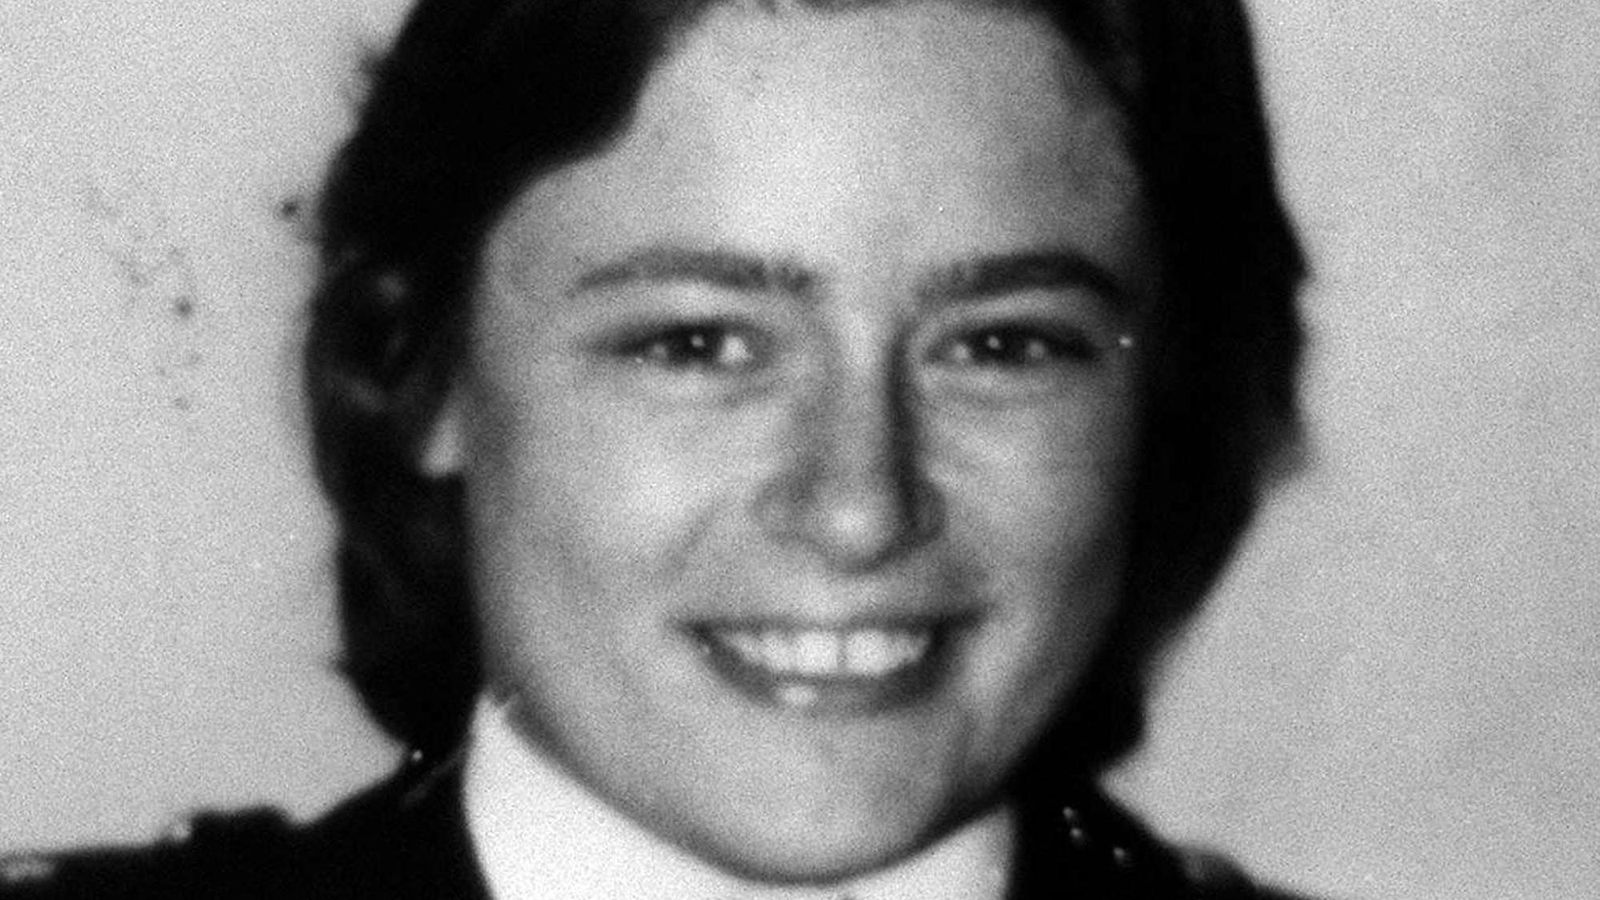 Vigil for WPC Yvonne Fletcher as hopes grow for prosecution 40 years after 'callous' murder